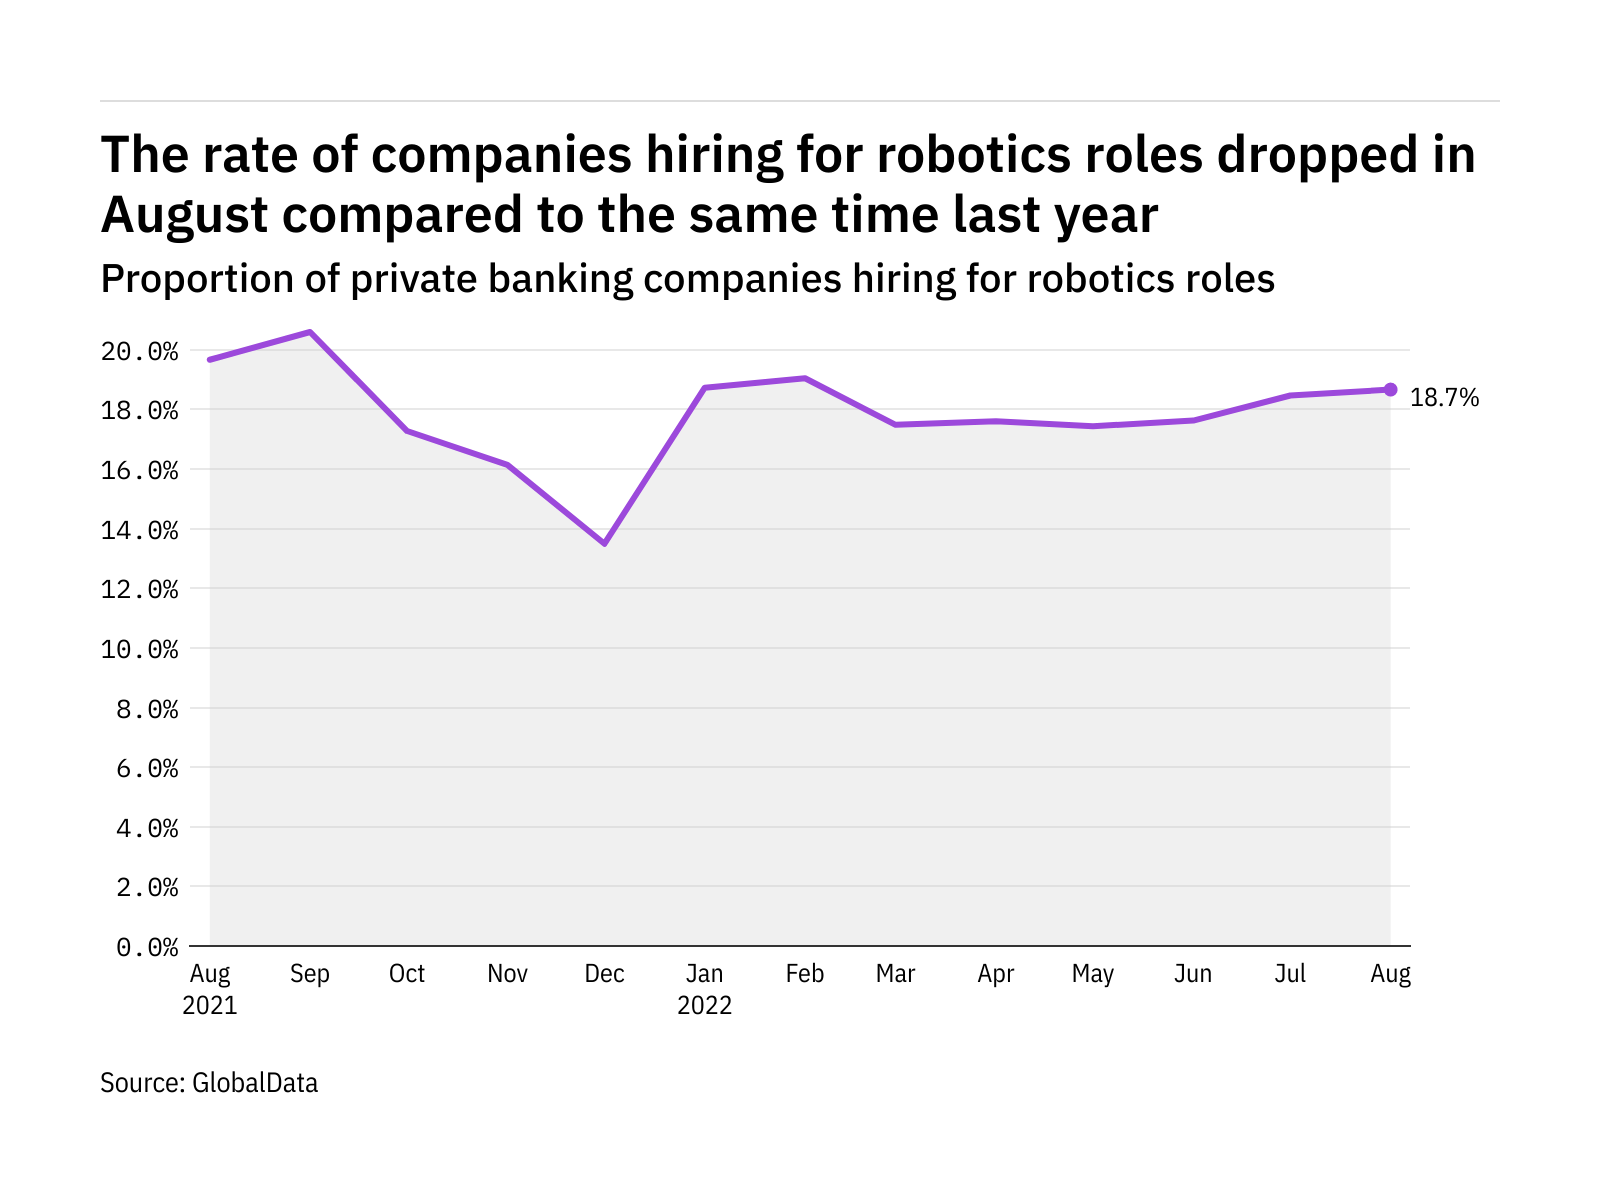 Robotics hiring levels in the private banking industry dropped in August 2022